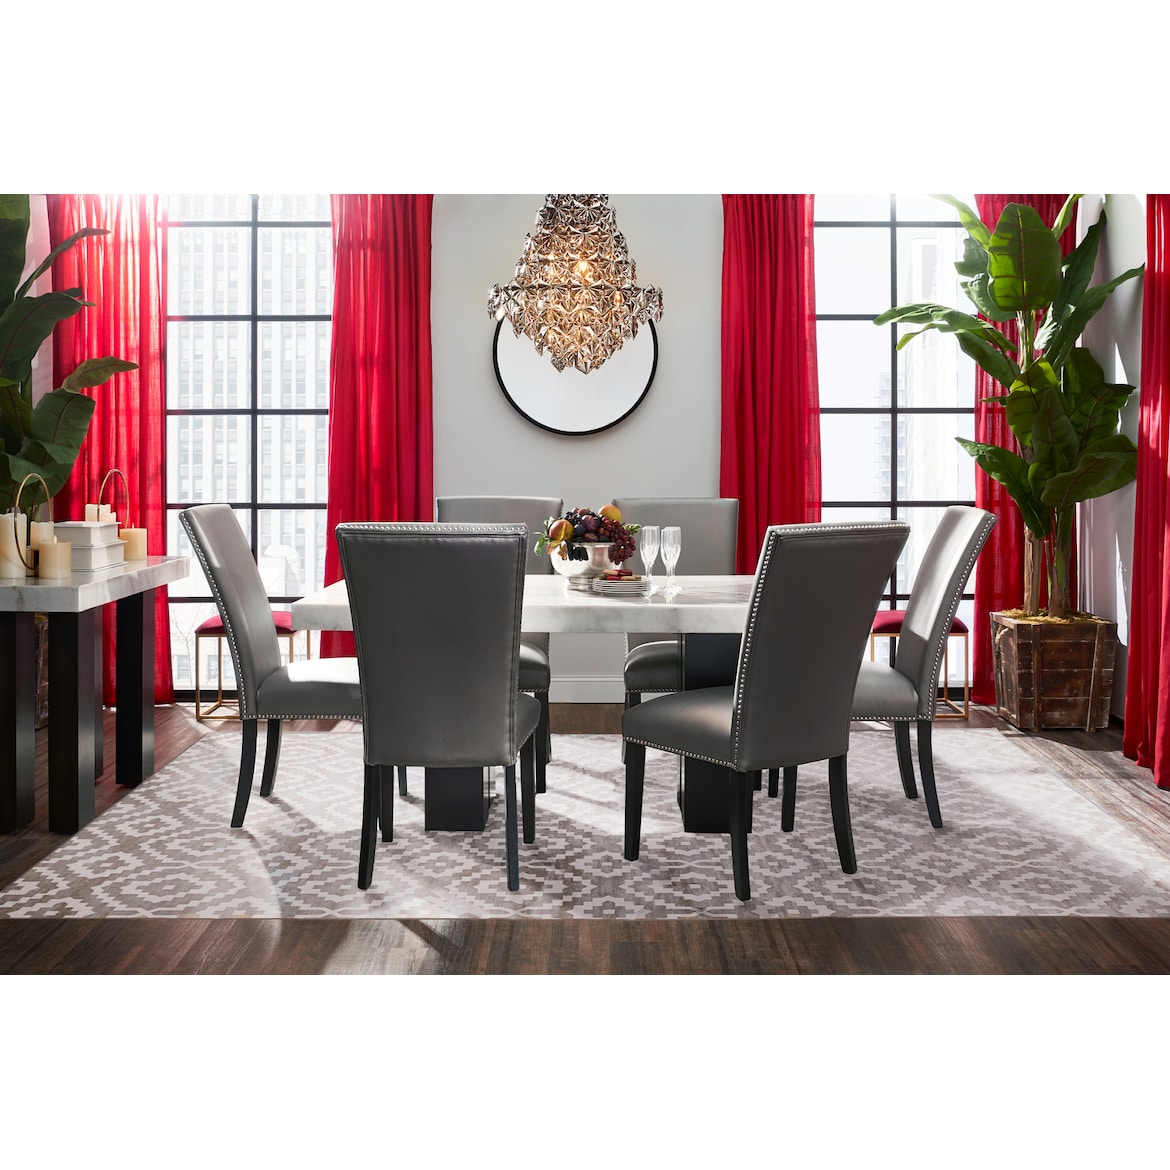 Artemis Marble Dining Table and 6 Upholstered Dining Chairs | Value